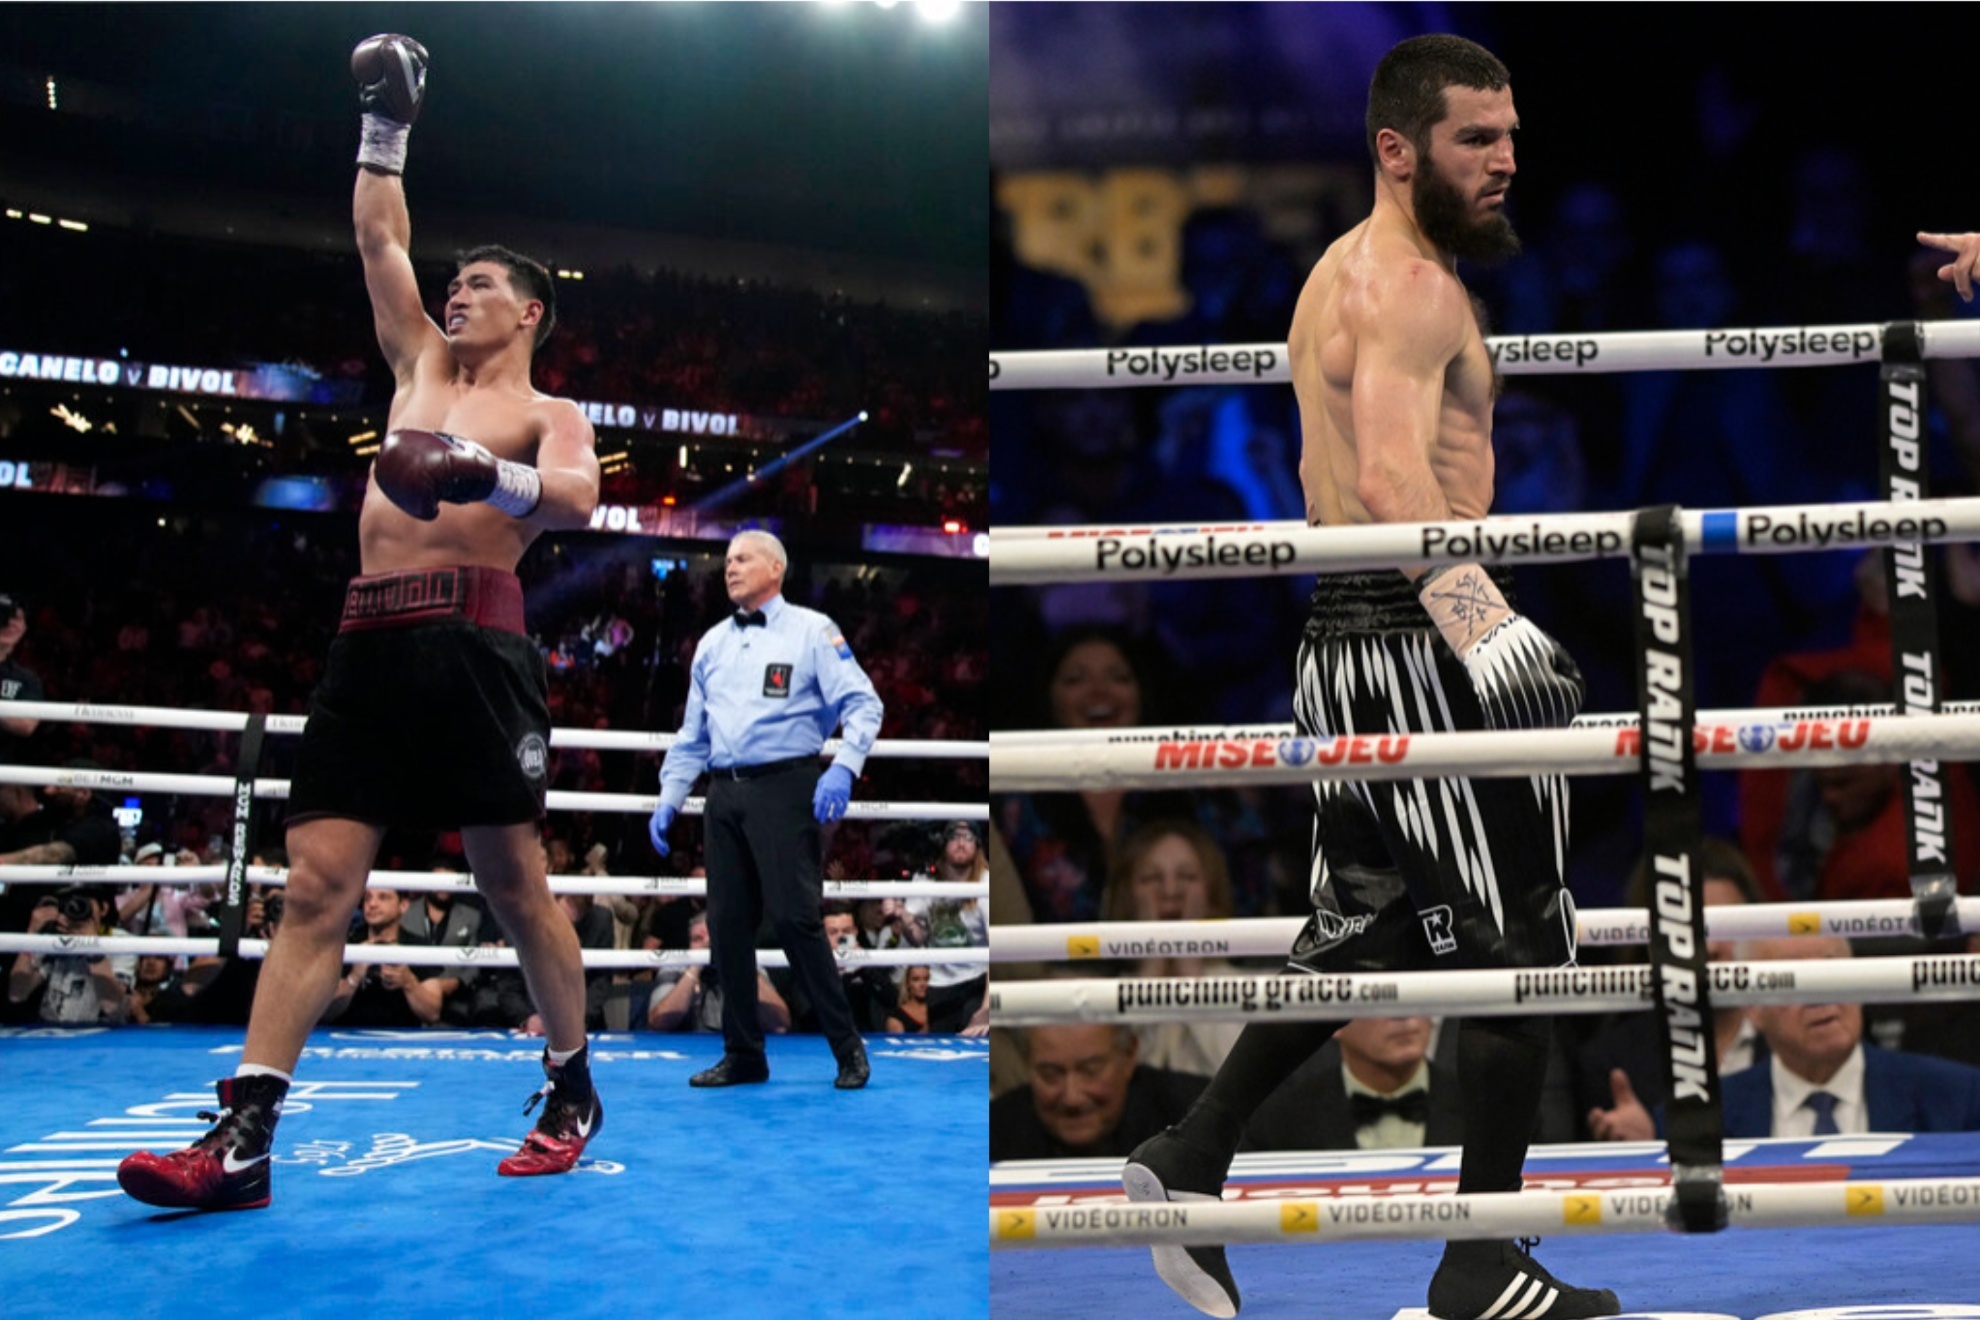 There is only one way to know who is better, Beterbiev or Bivol.